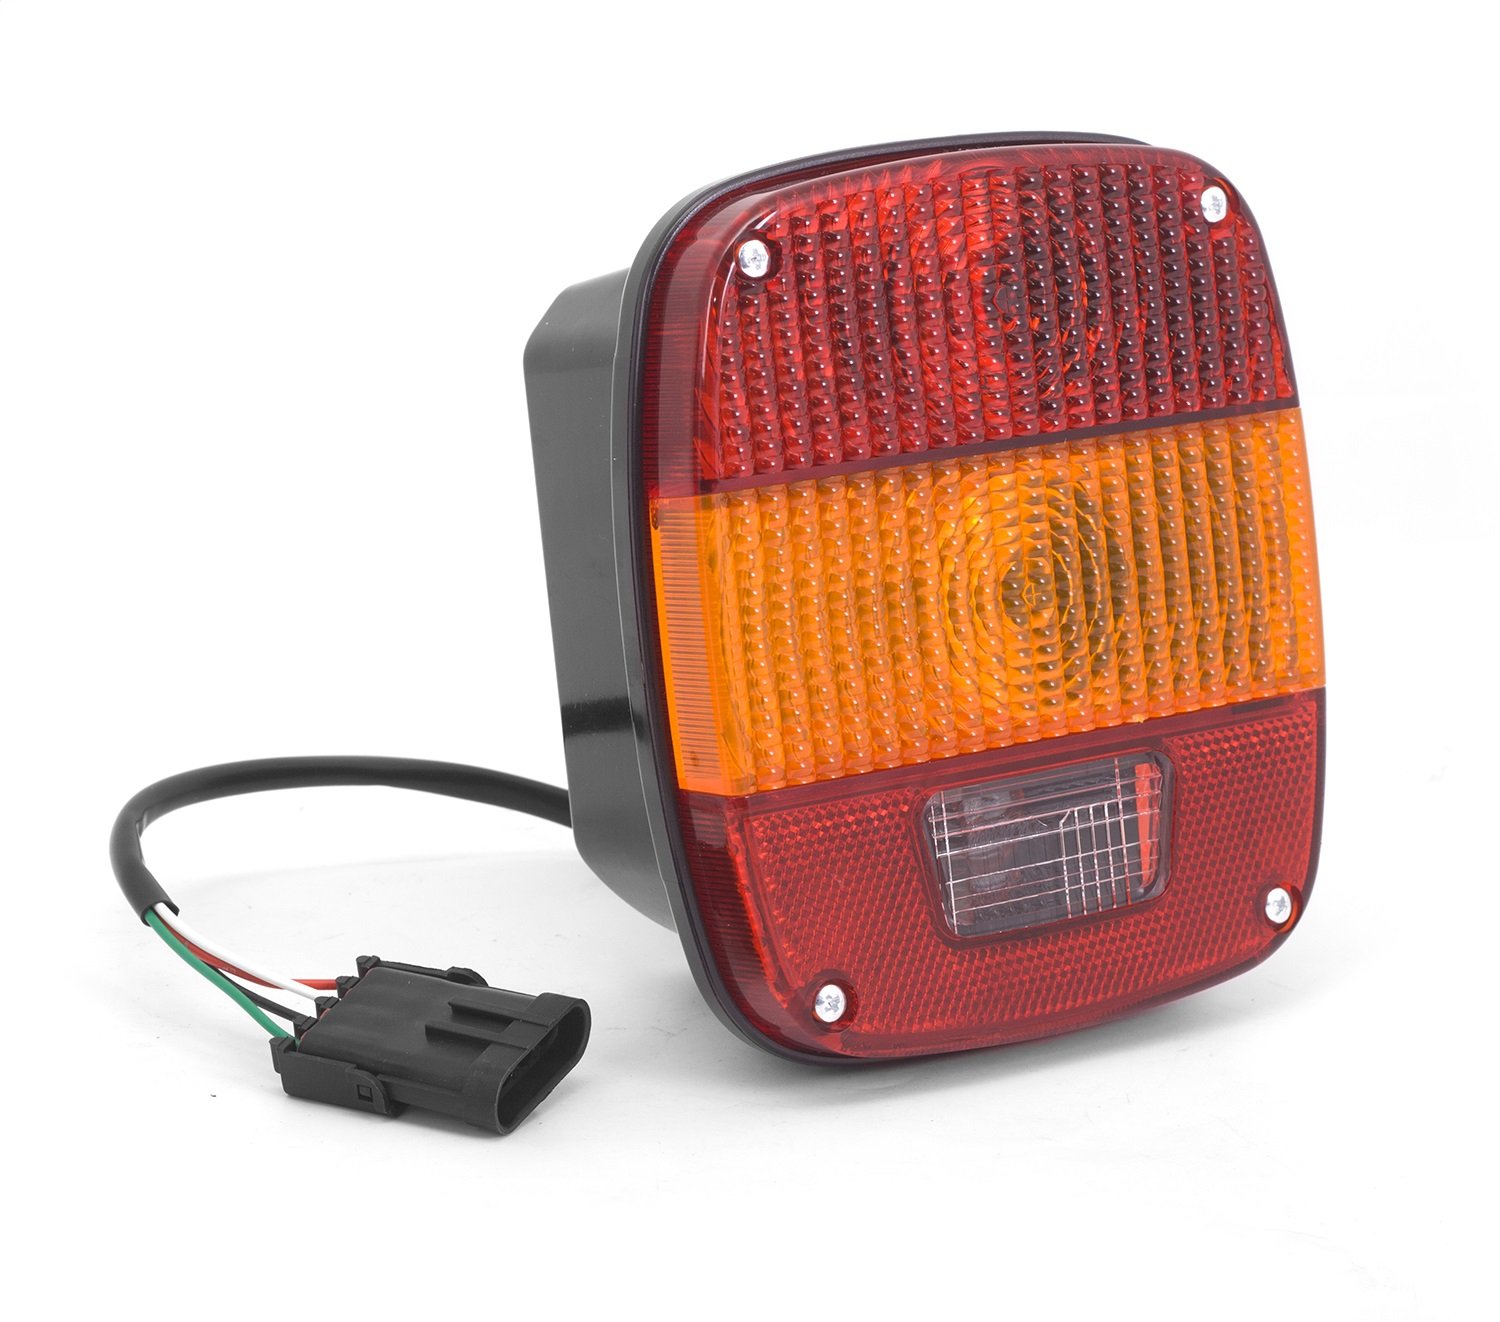 Replacement tail light from Omix-ADA, Fits 97-06 Jeep